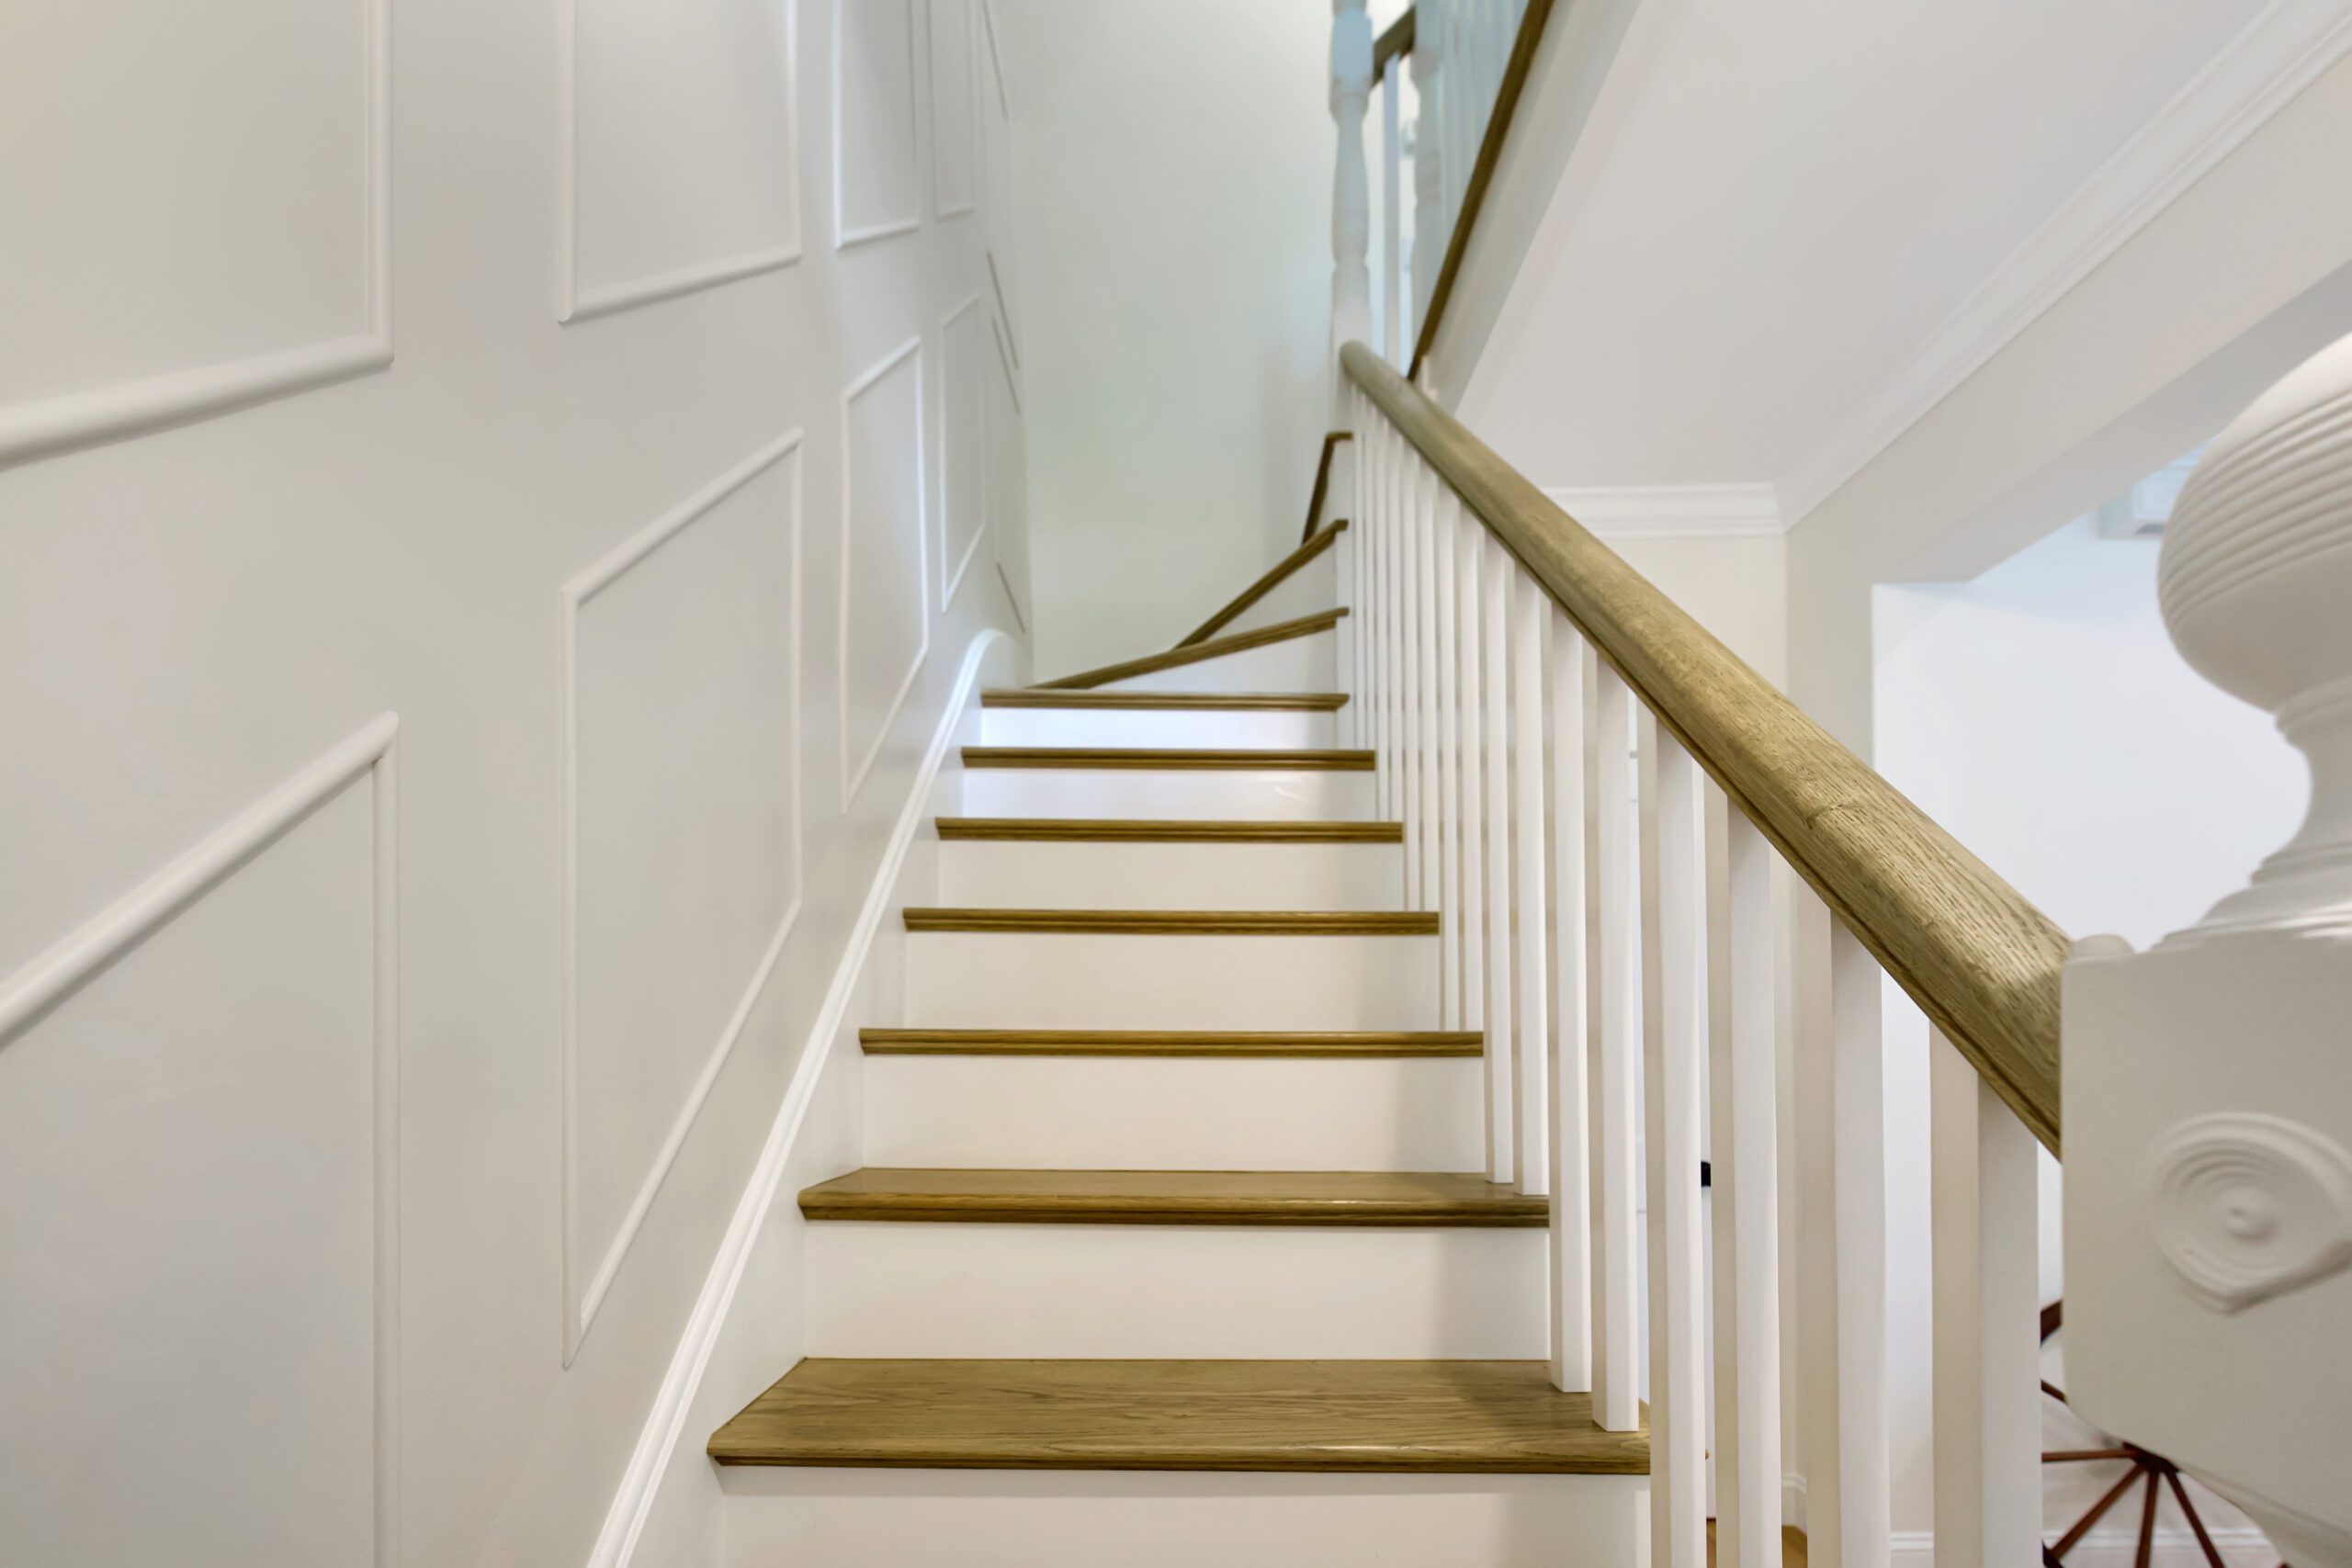 Image of a renovated staircase with polished wooden steps and white risers. The crisp white railing complements the new wall paneling, adding texture and interest to the space, illuminated by an elegant light fixture. Original post was restored.